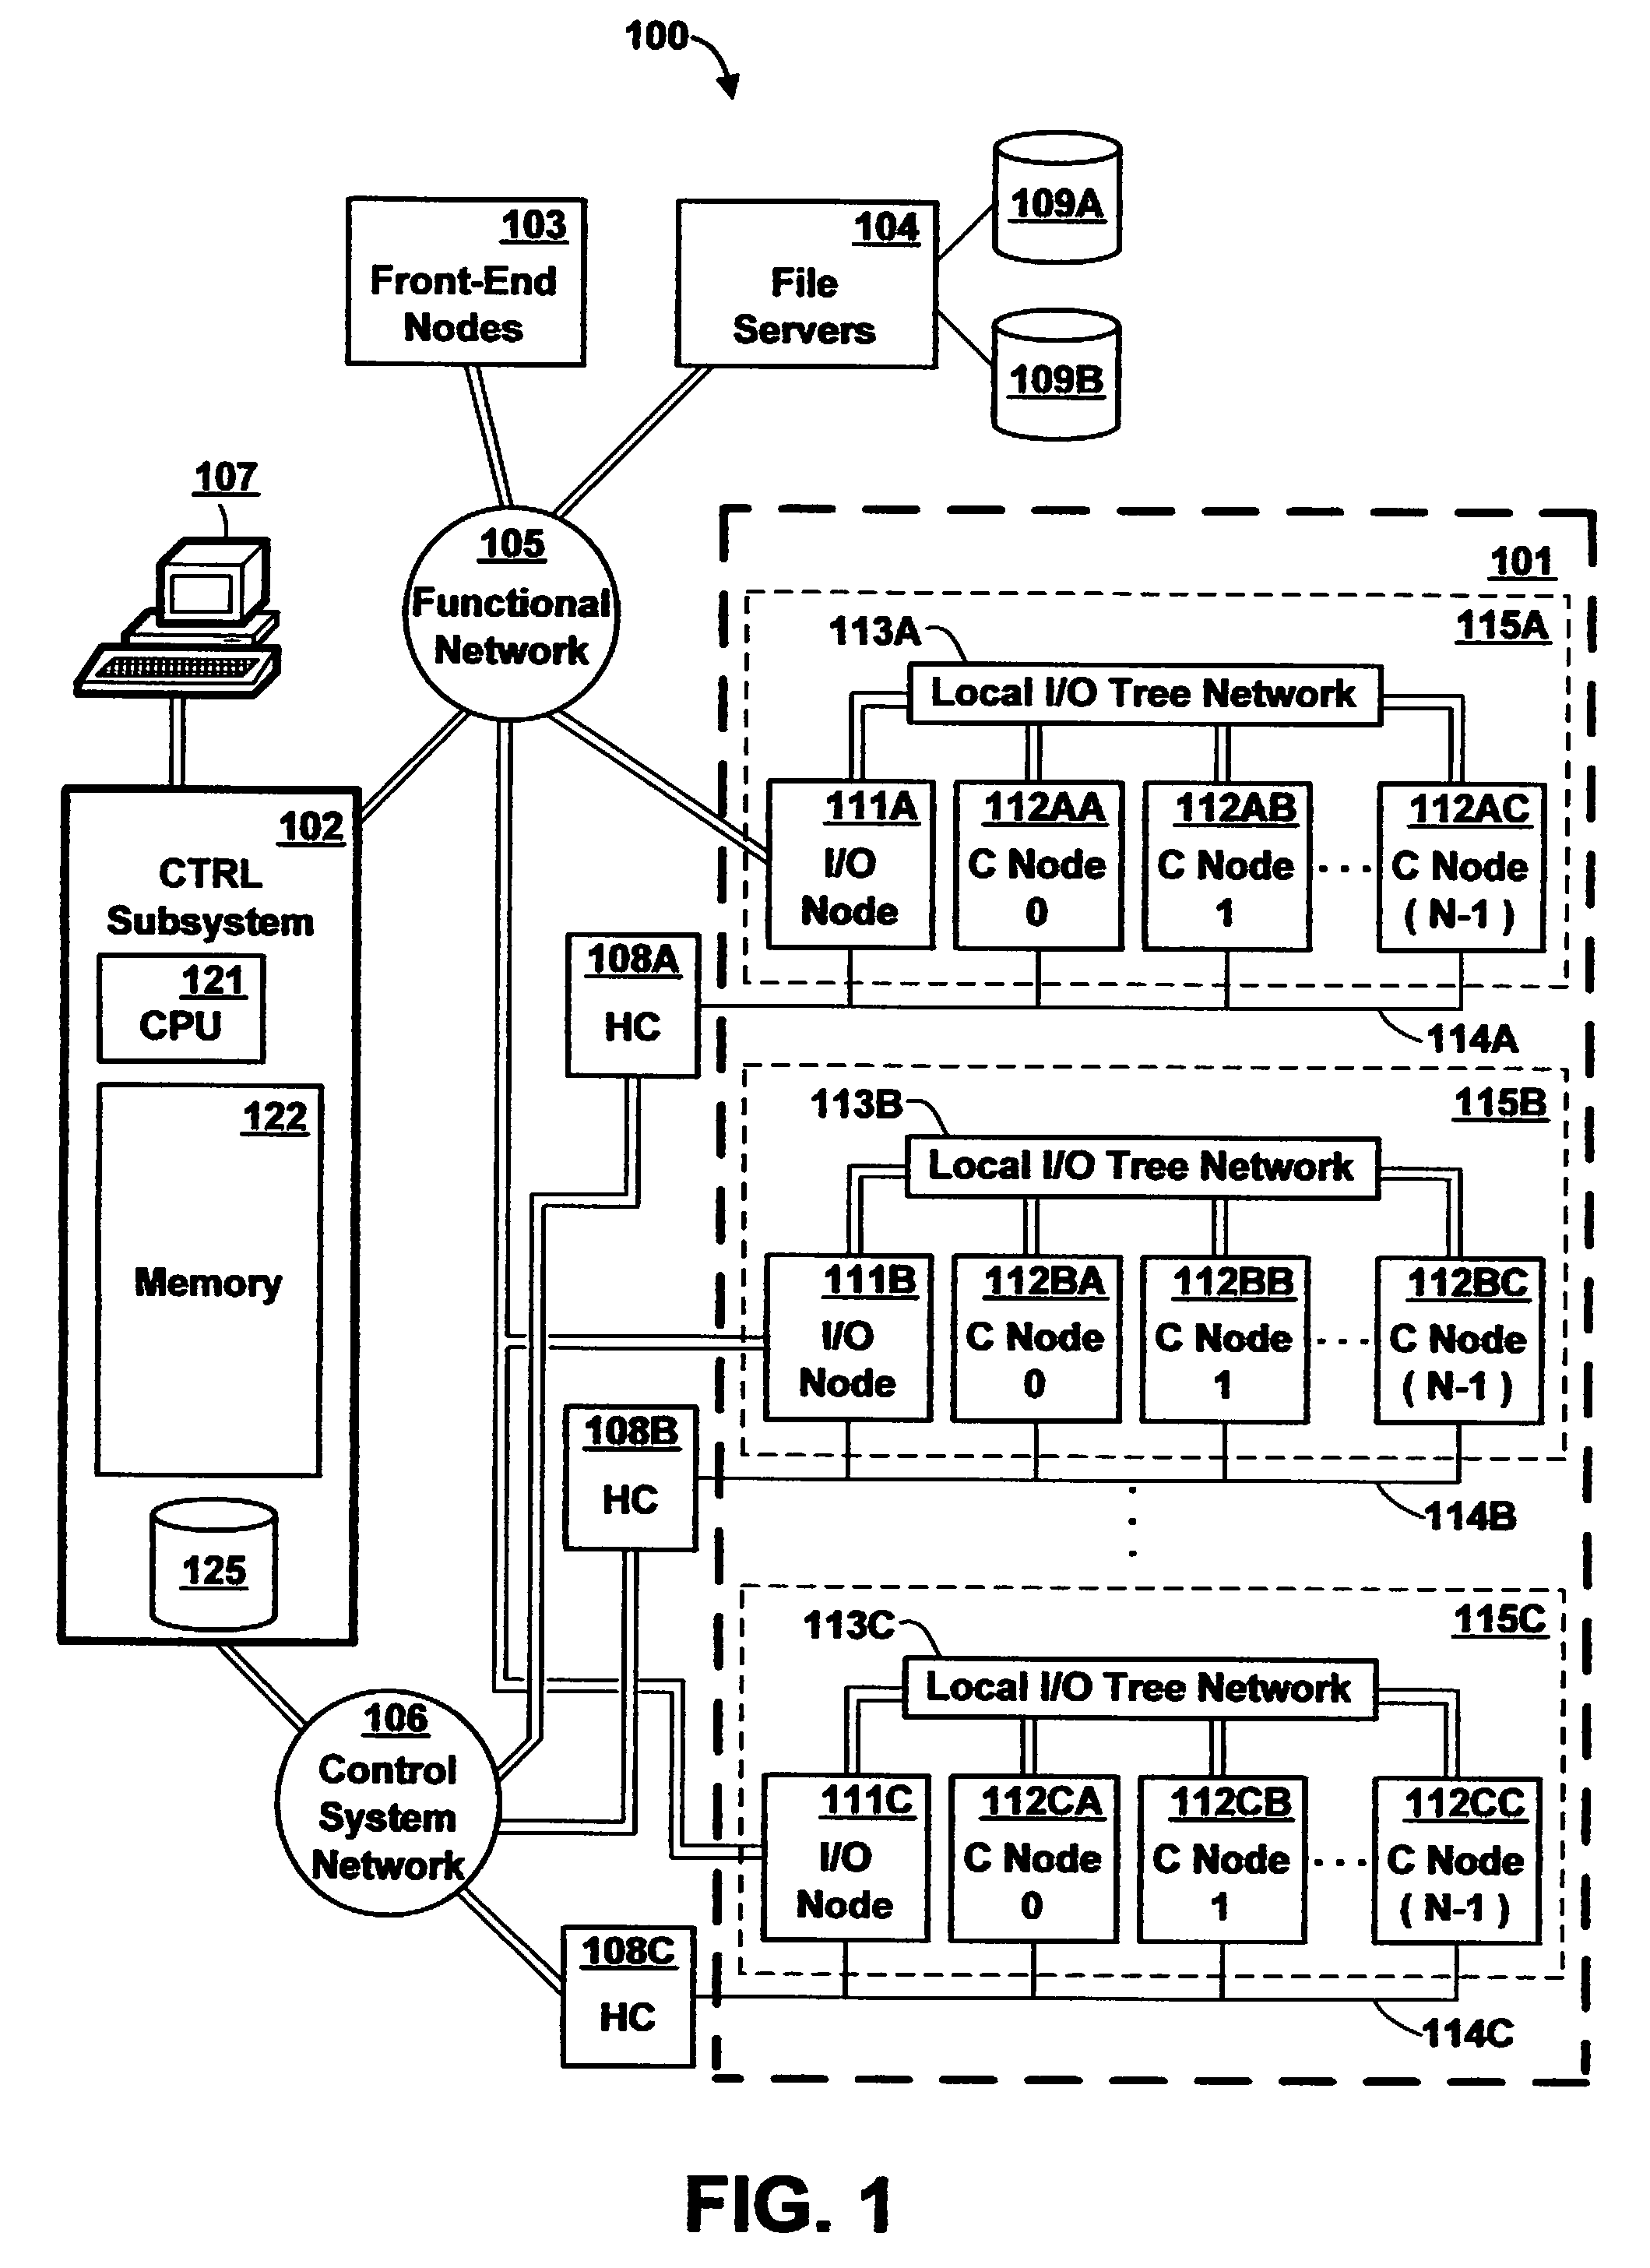 Method and Apparatus for Routing Data in an Inter-Nodal Communications Lattice of a Massively Parallel Computer System by Dynamically Adjusting Local Routing Strategies